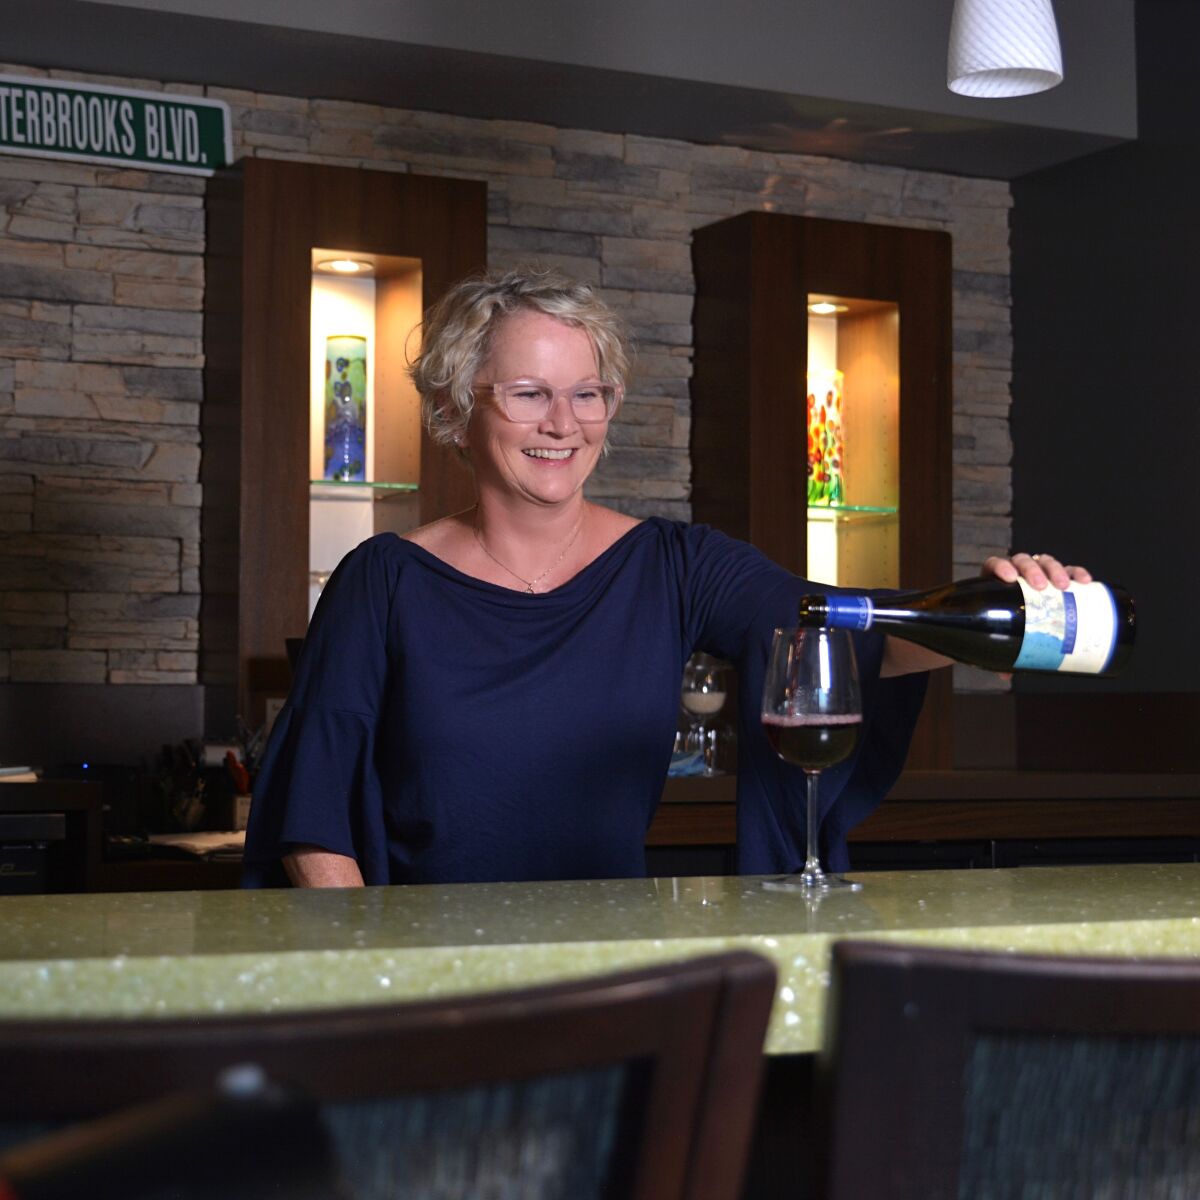 Sandy Hanshaw, the new chairwoman of the Point Loma Association, owned The Wine Pub in Point Loma for 12 years.